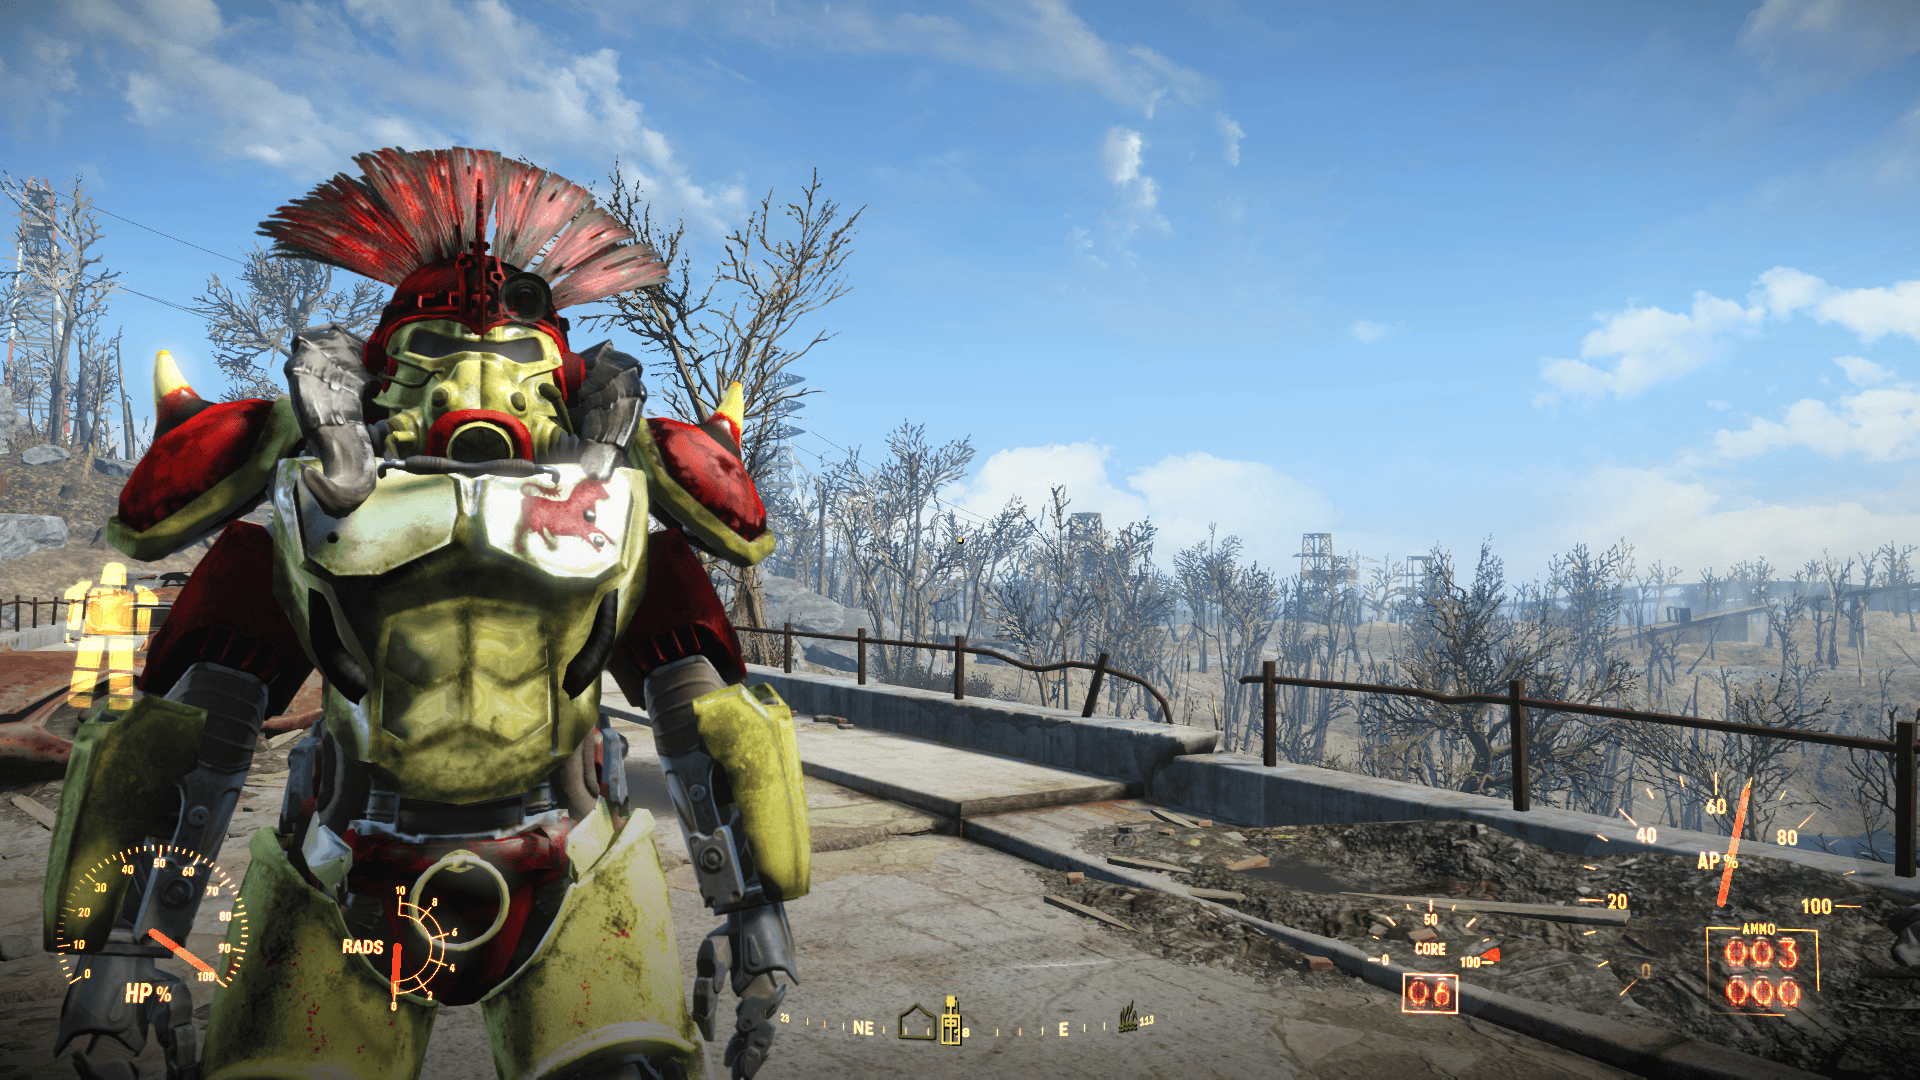 Legate Power Armor Mod. Coming Soon #Fallout4 #gaming #Fallout